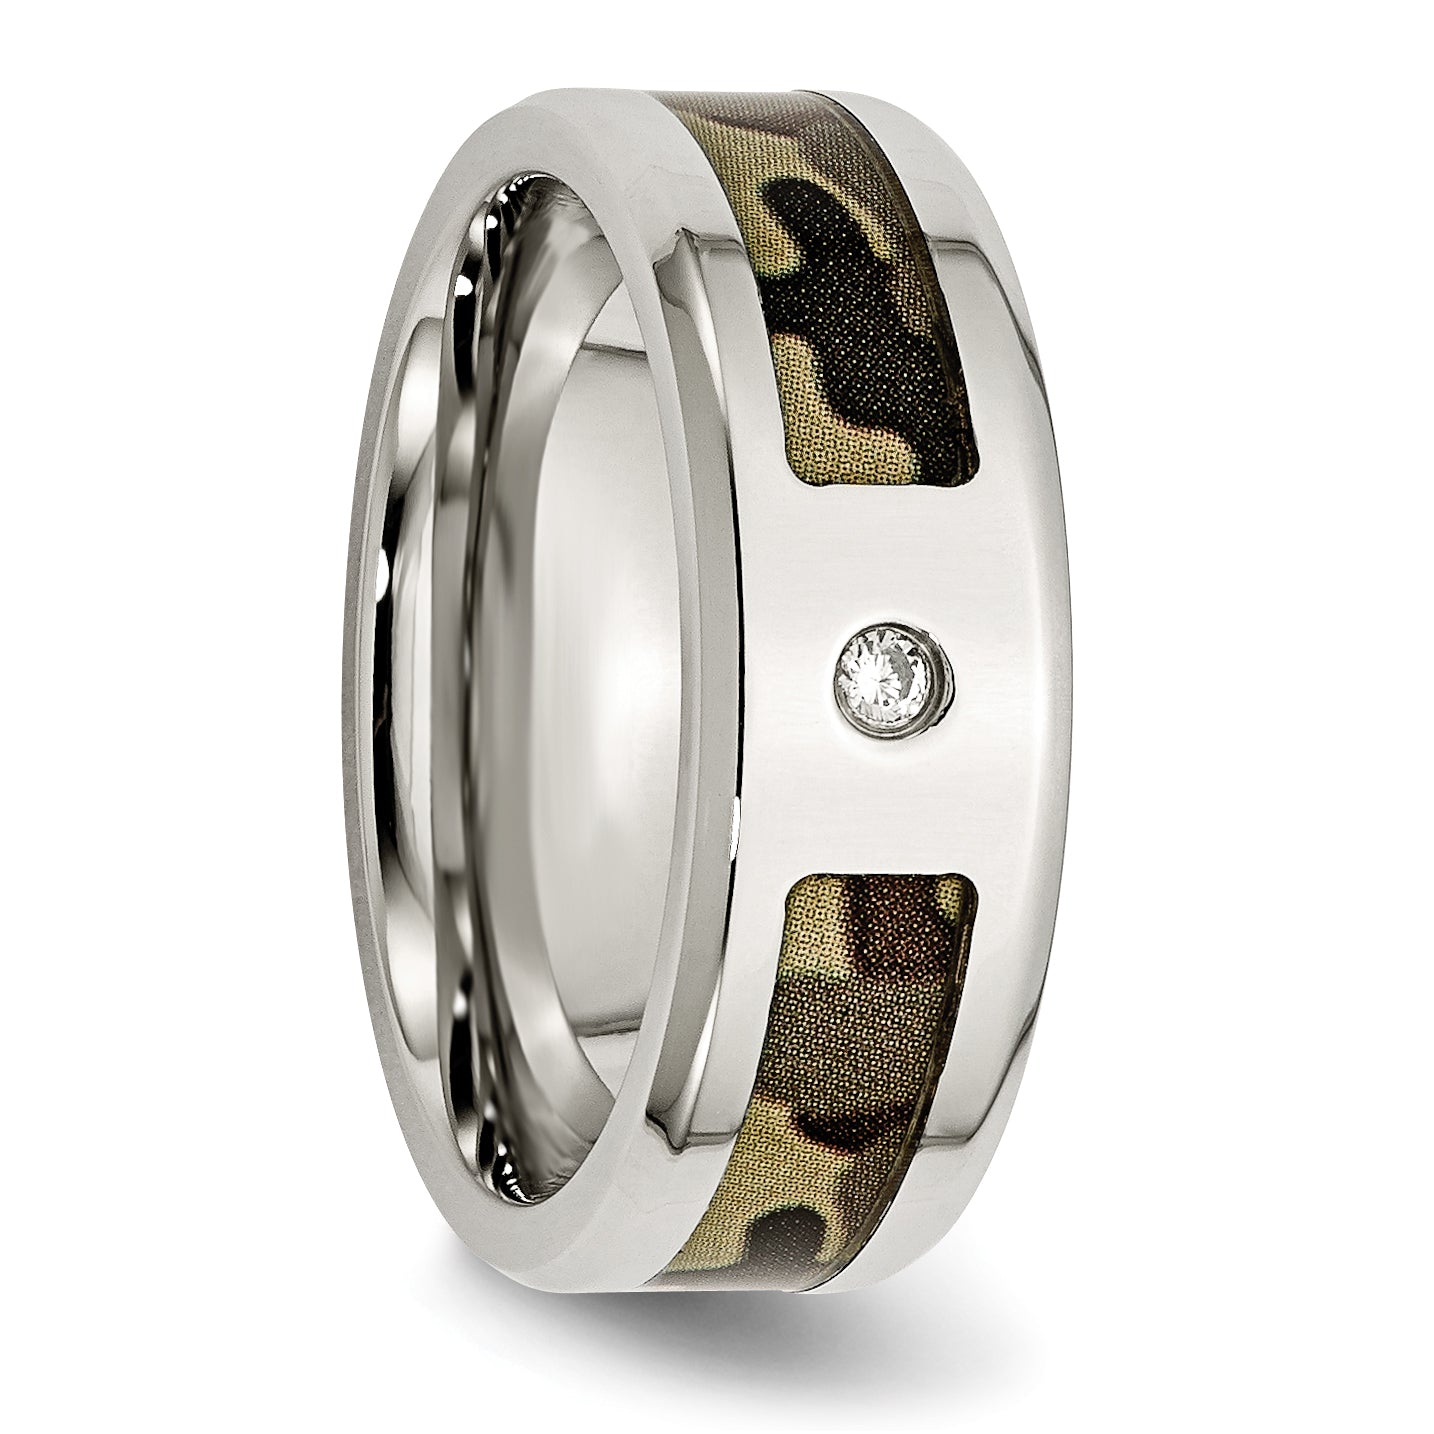 Stainless Steel Polished with CZ Printed Brown Camo Under Rubber 8mm Band